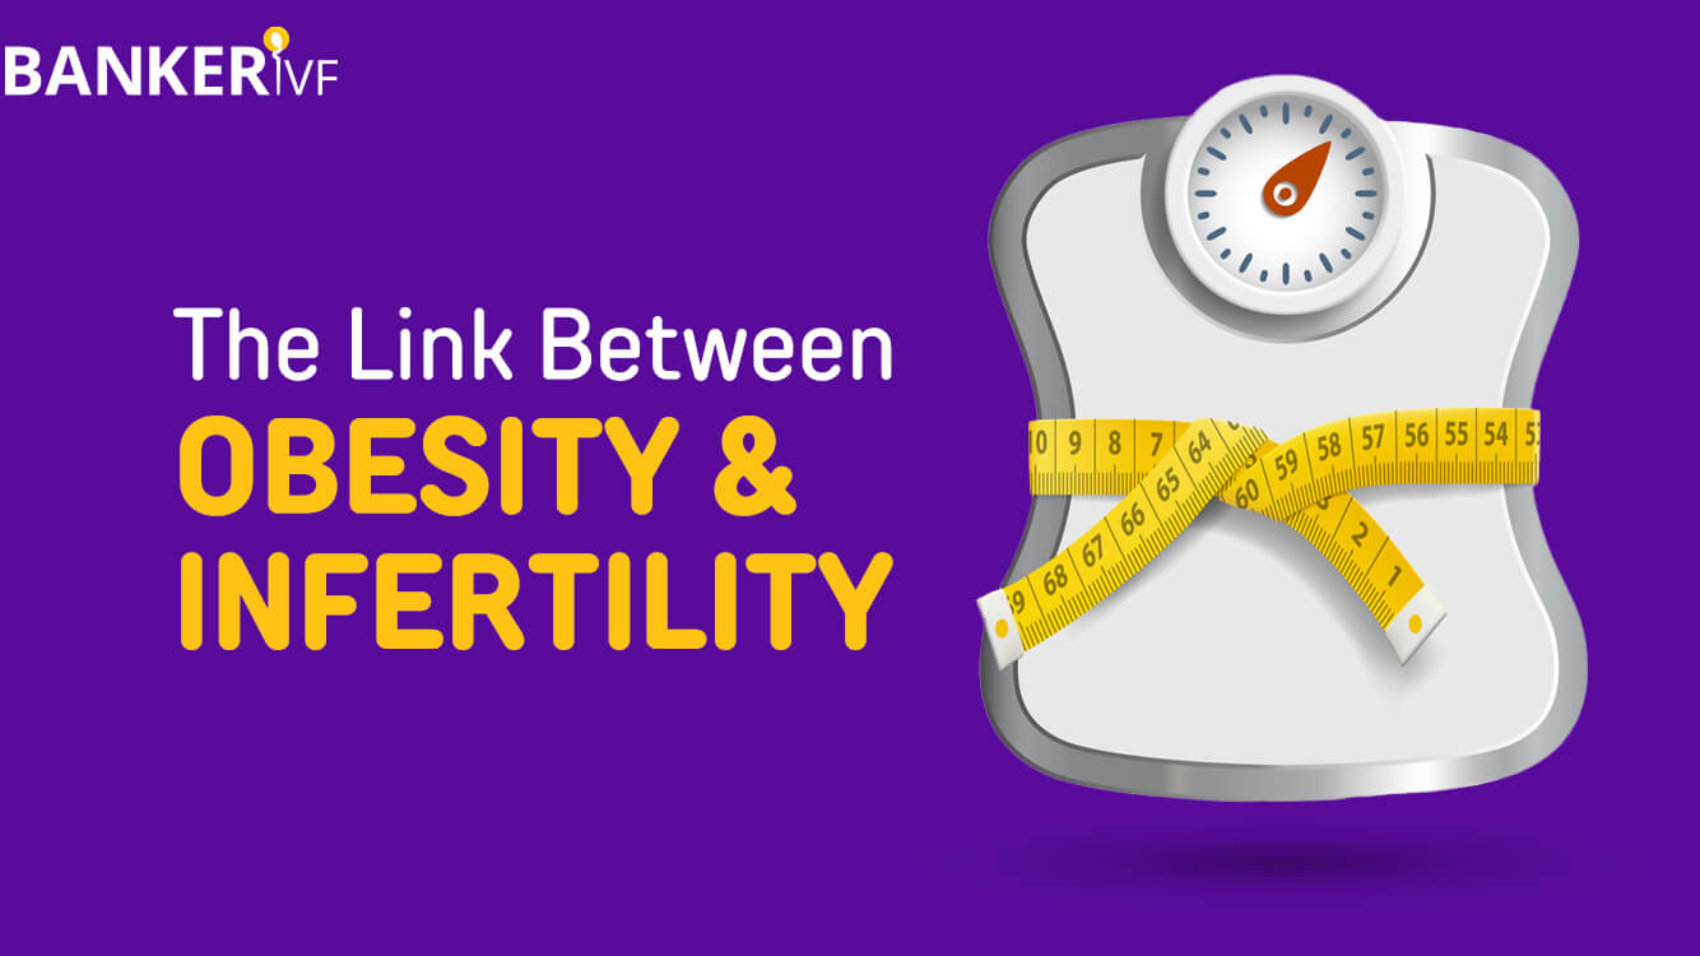 Obesity-and-Infertility-Banker-IVF-02